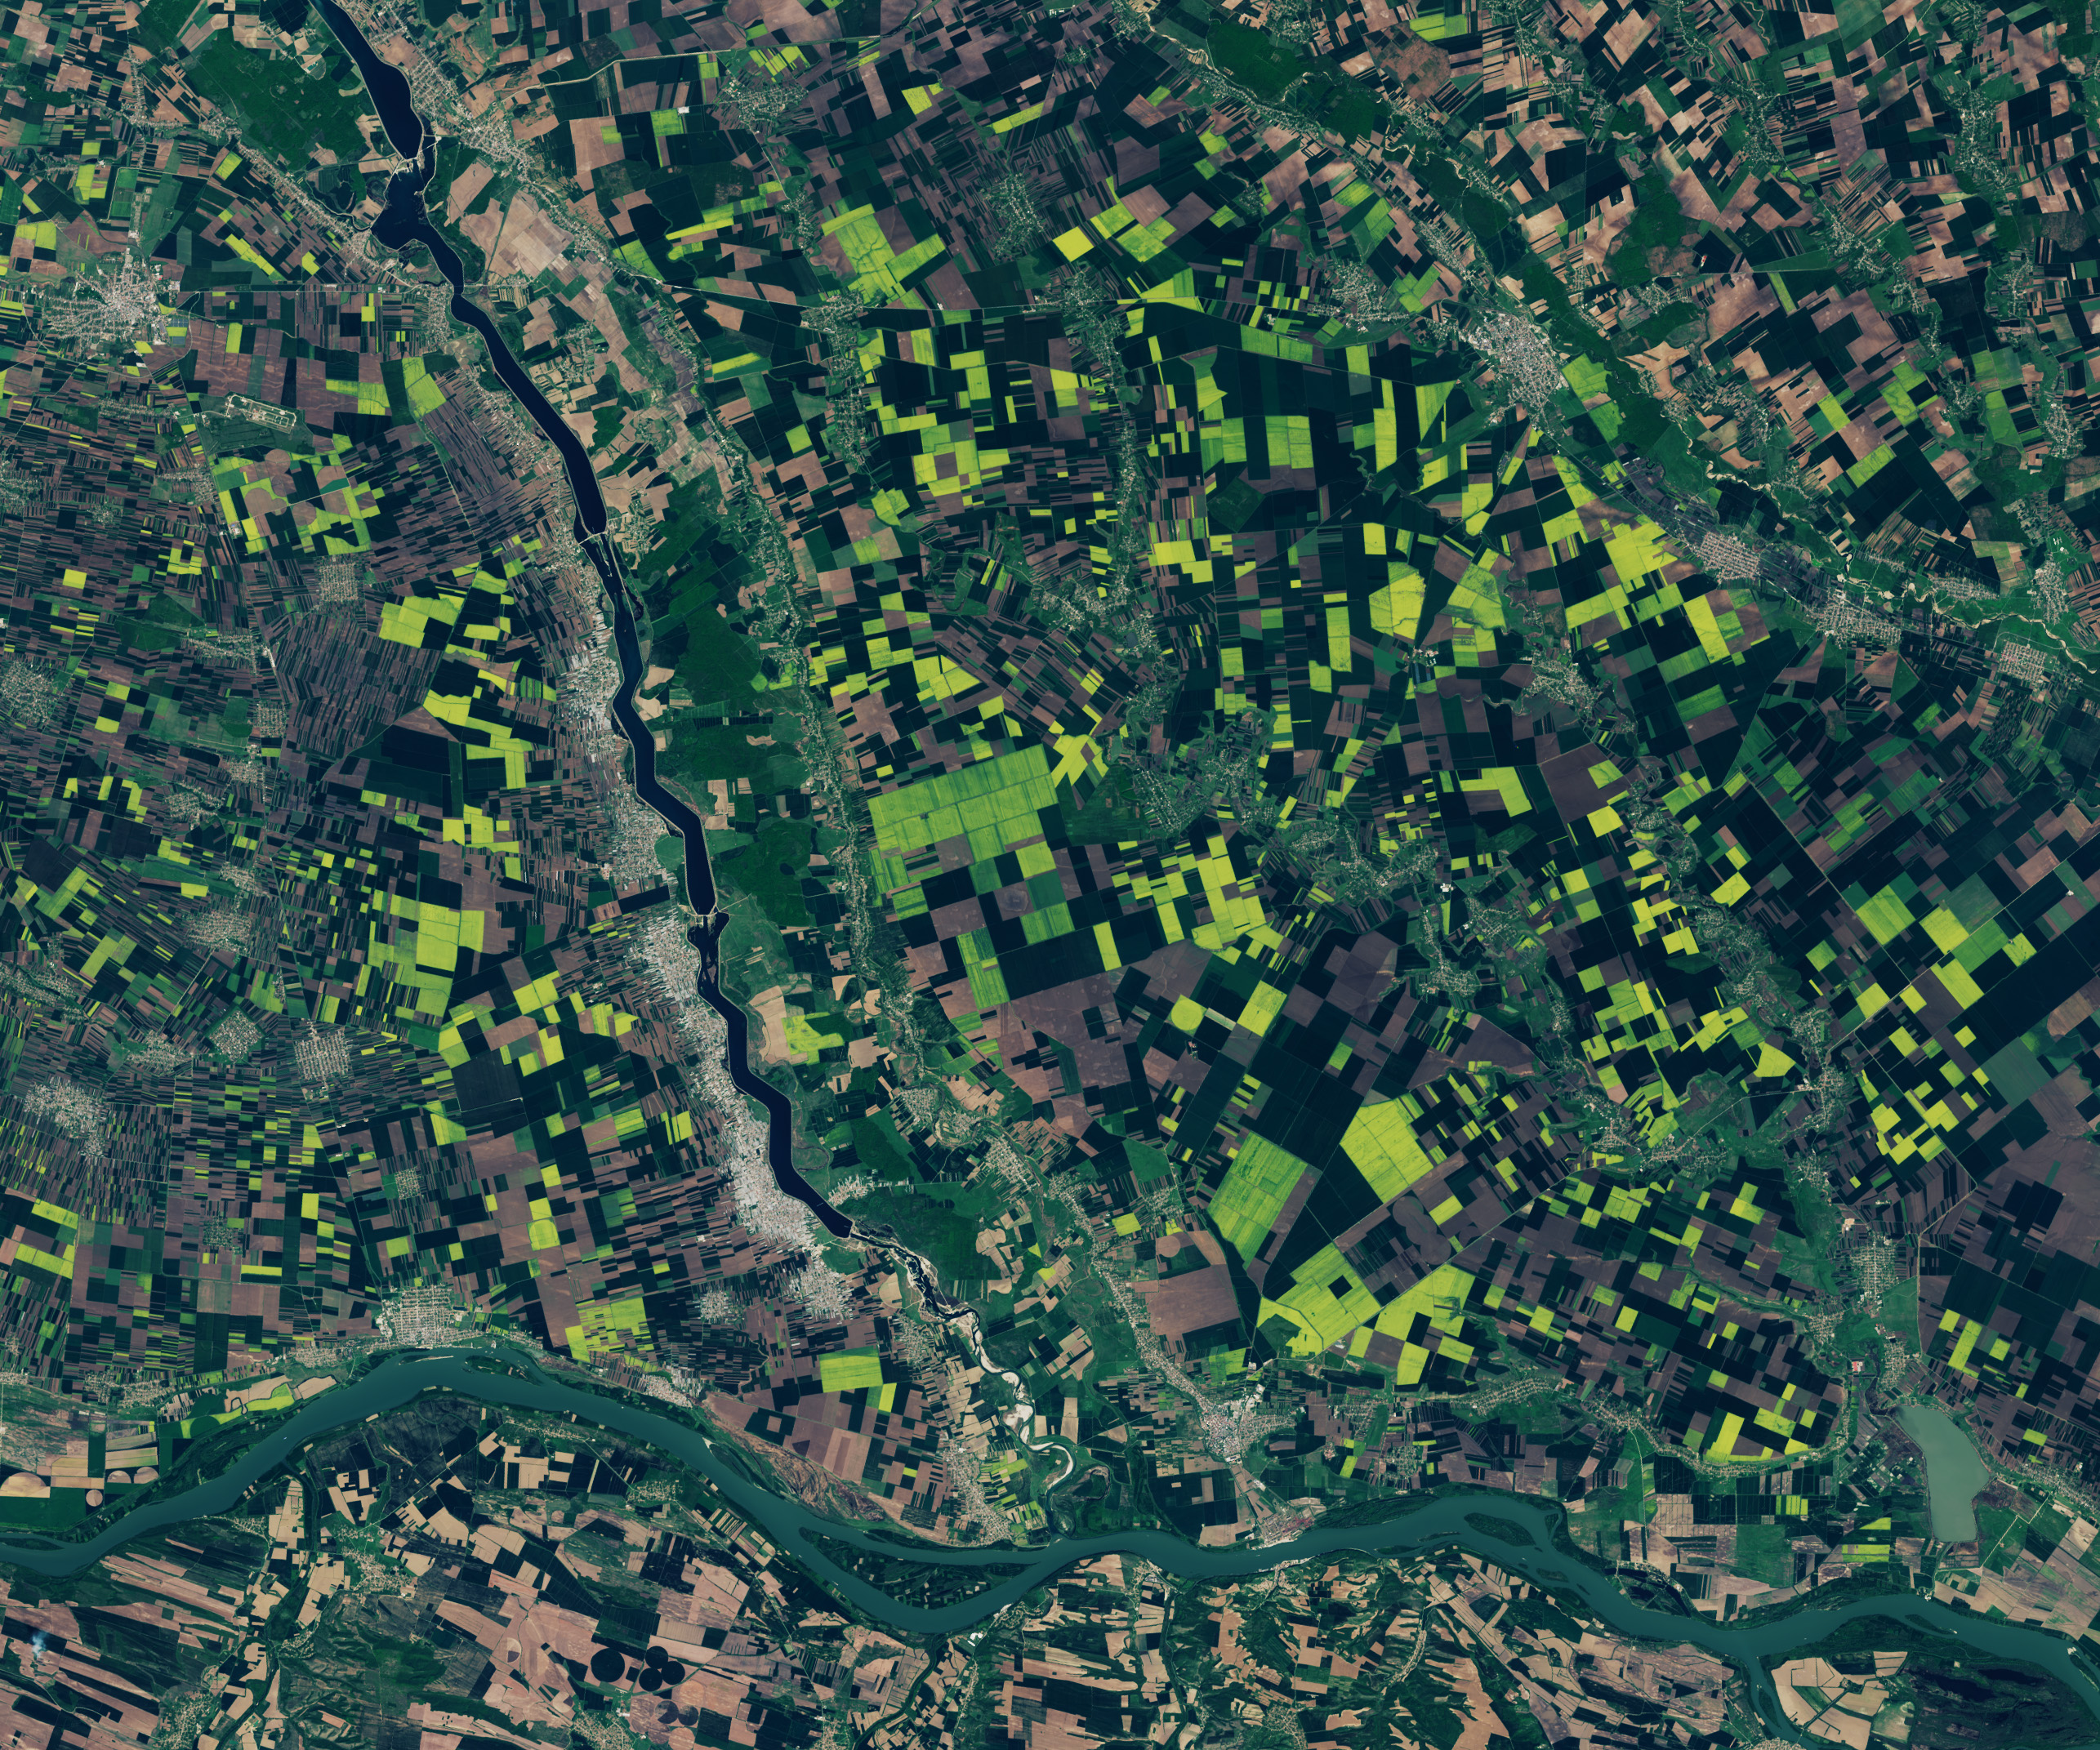 The confluence of the Olt River, from top left directly to bottom center, with the Danube River, along the bottom of this satellite image, are shown. Above the Danube are a significant number of crop fields, some brown, but most either black or a vibrant green that is verging on yellow.